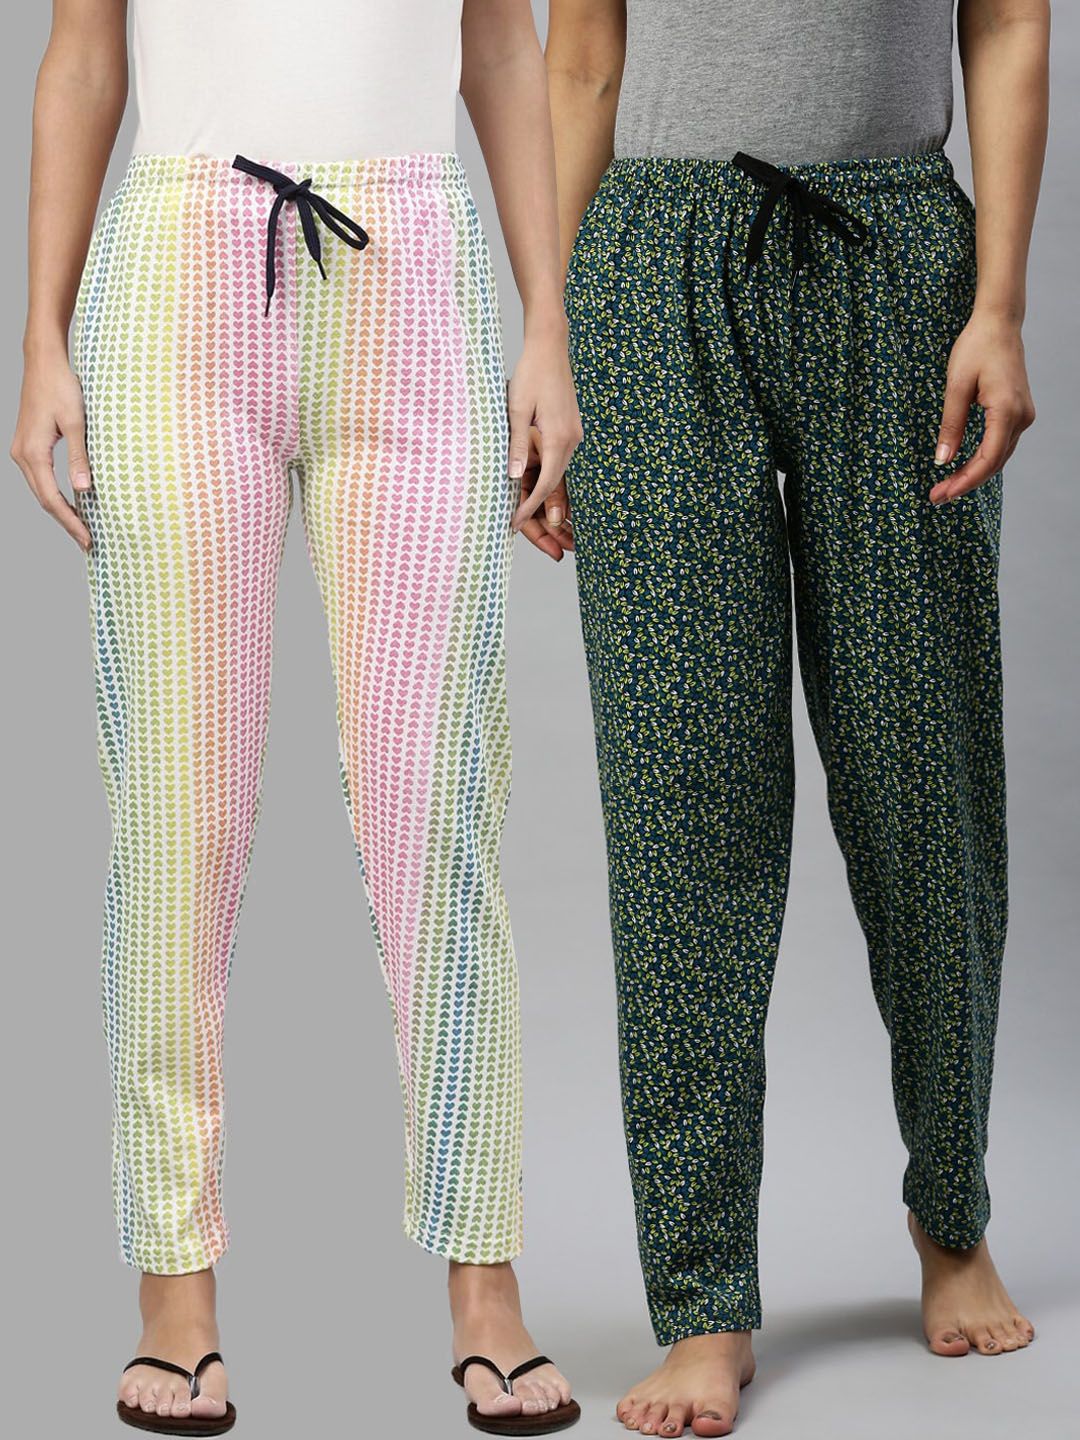 Kryptic Women 100% Cotton Full Length Lounge Pants - Pack of 2 Price in India